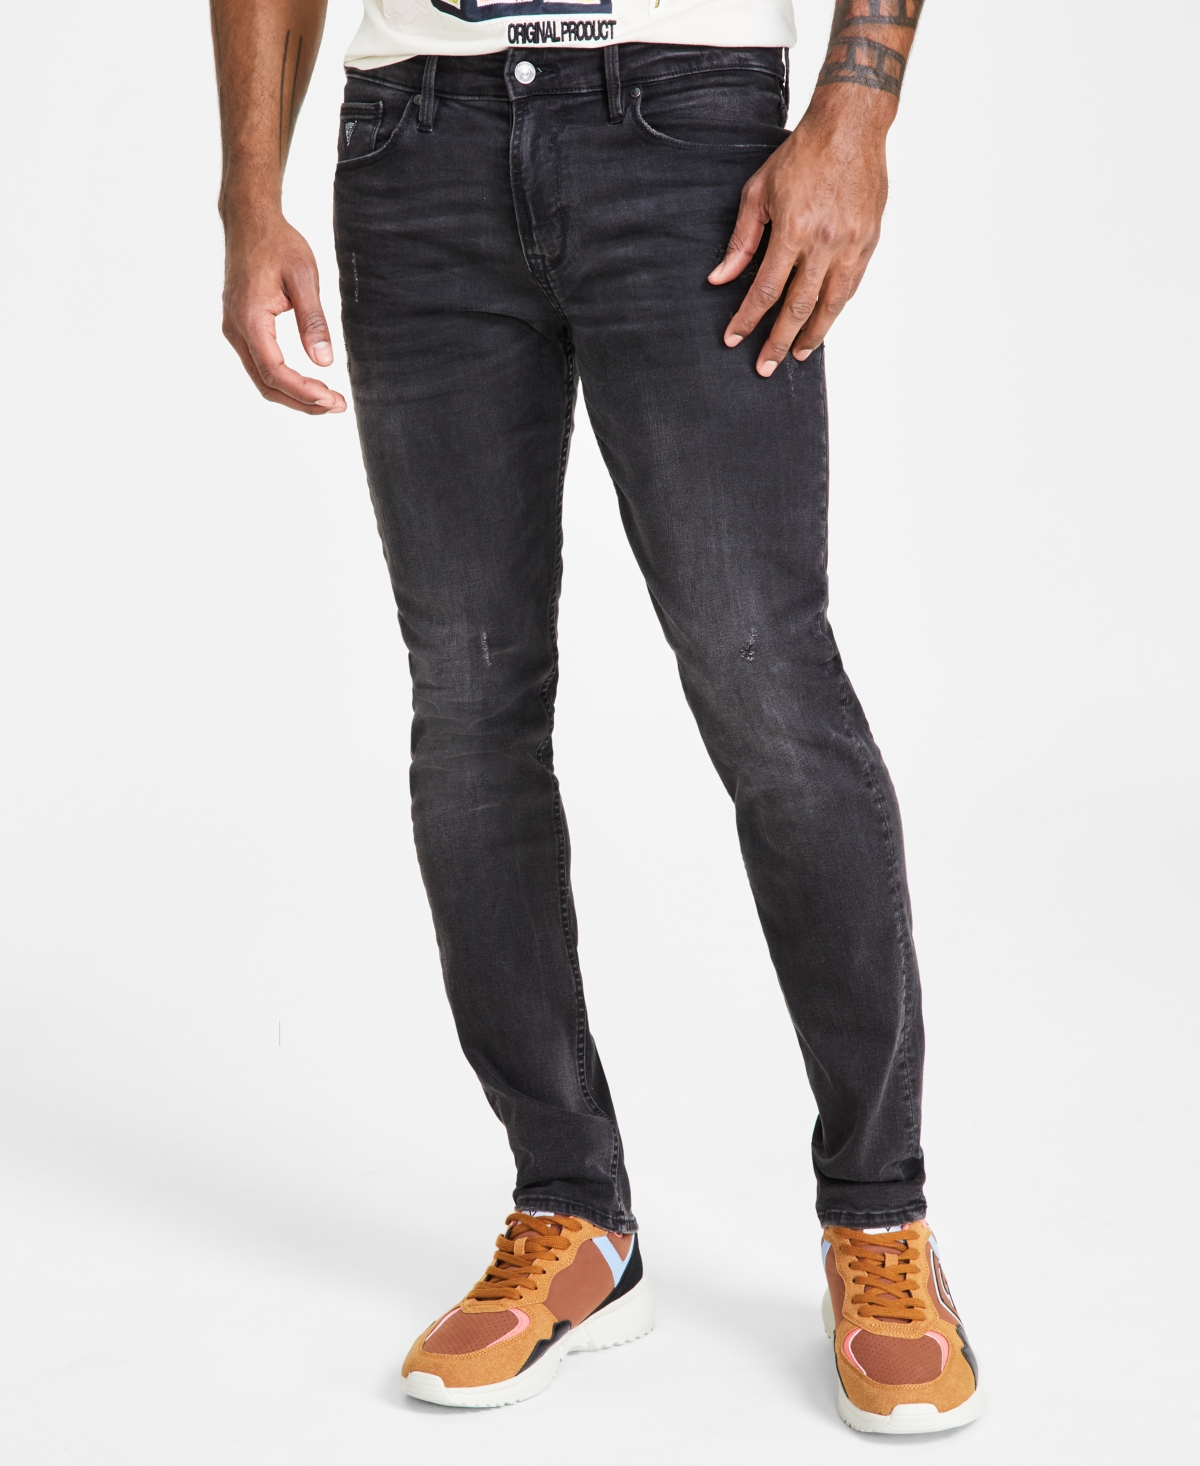 Men's Distressed Slim Tapered Fit Jeans - Idaho